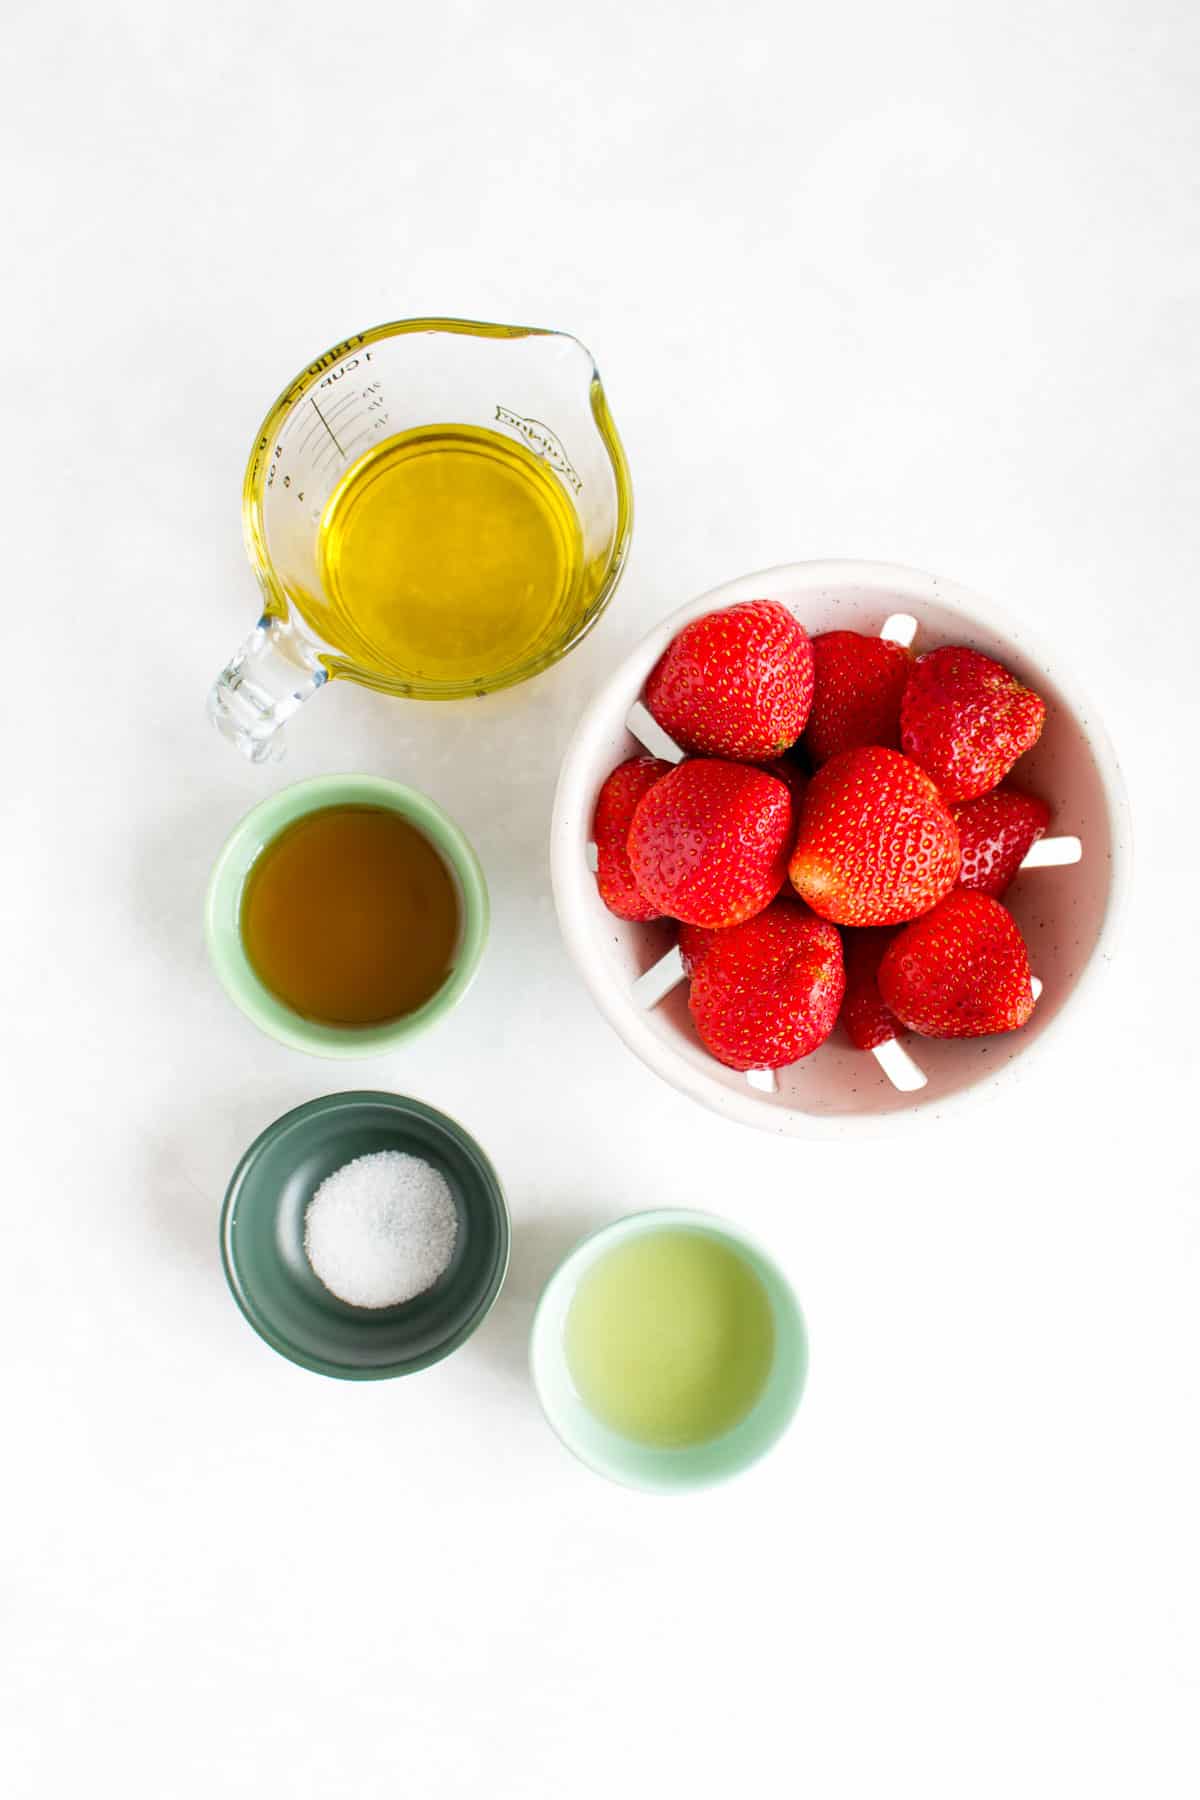 Ingredients needed to make a strawberry vinaigrette.